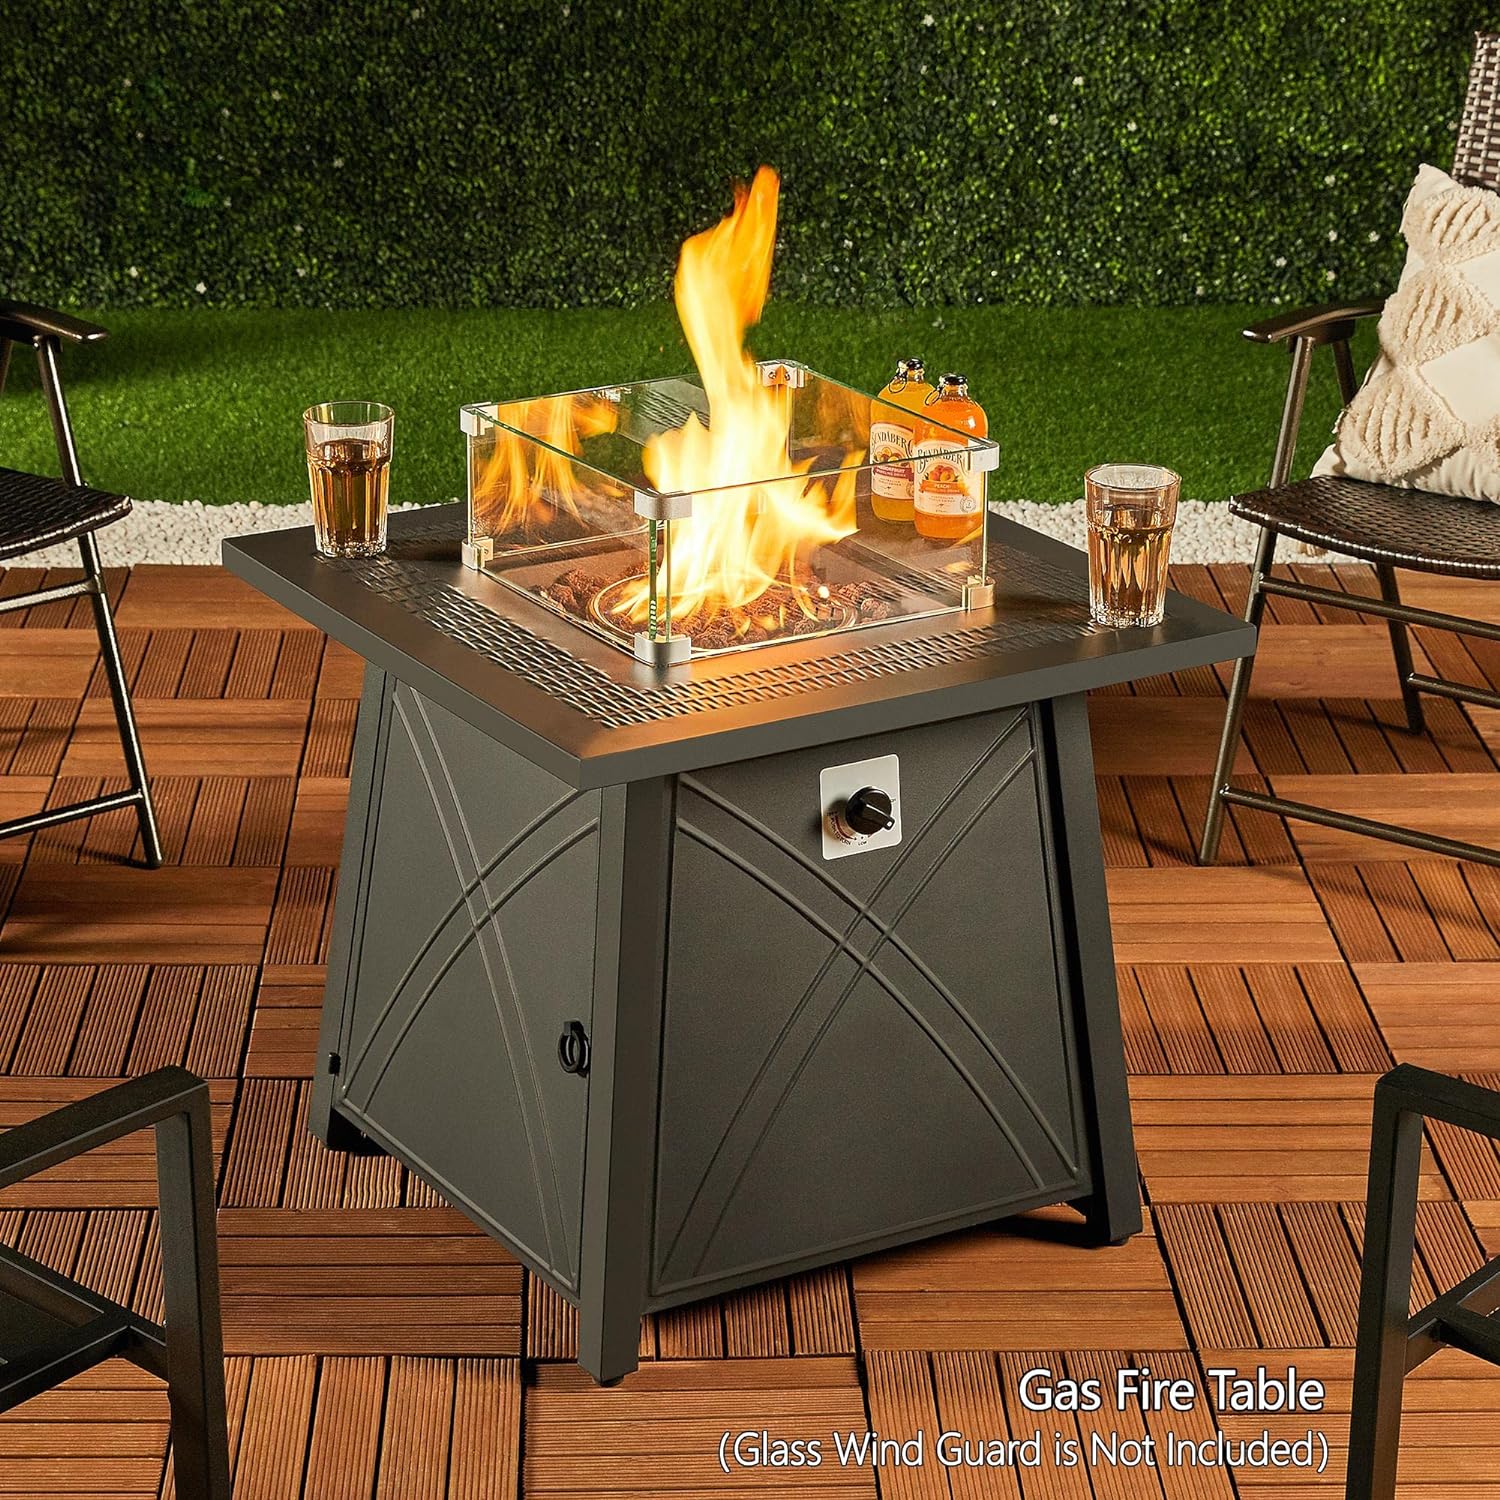 Yaheetech Gas Fire Pit Table Review